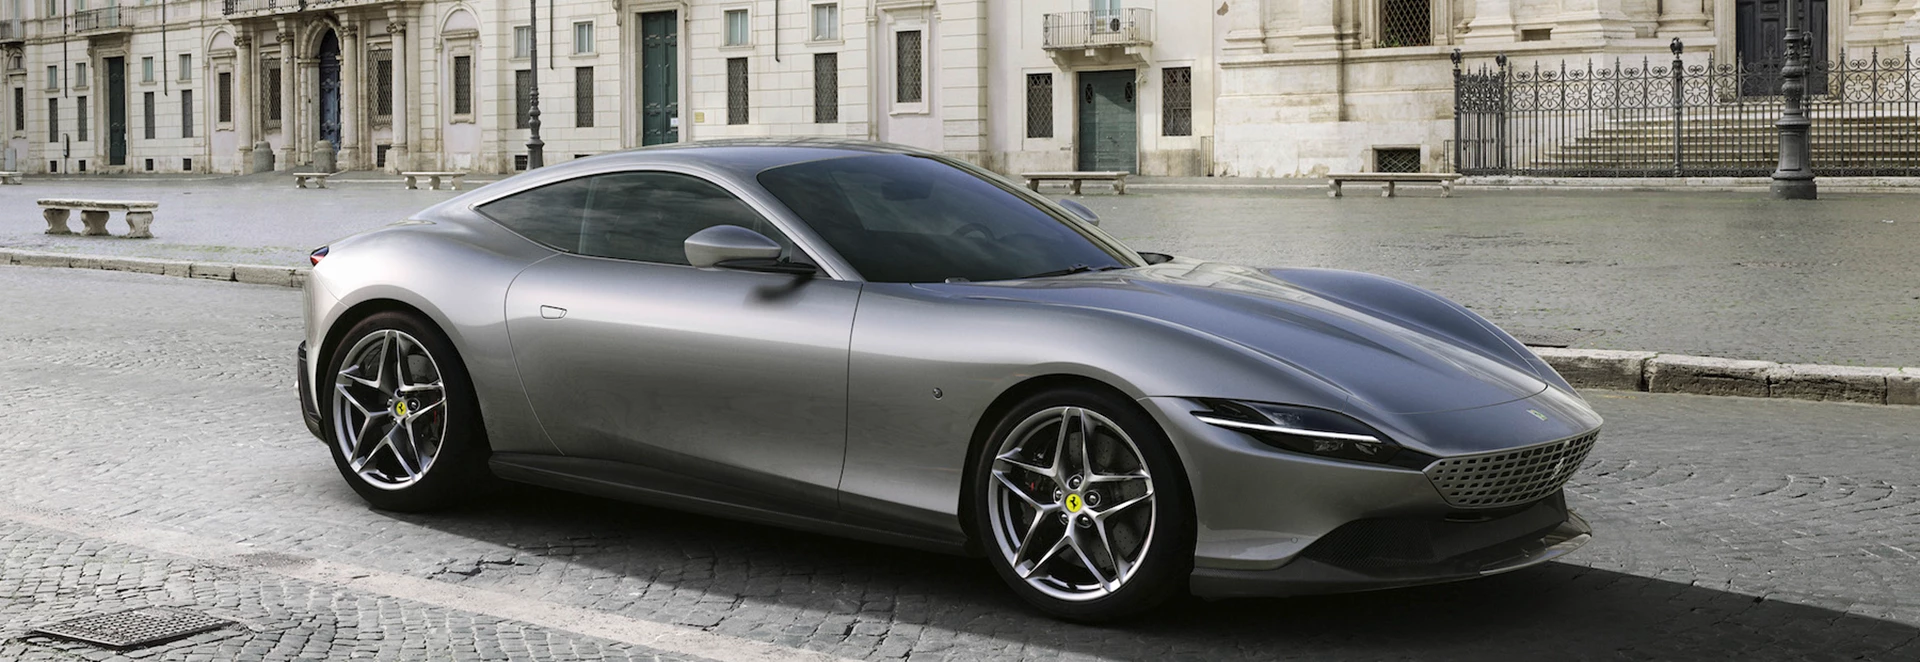 Ferrari unveils new Roma as four-seat V8-powered Coupe